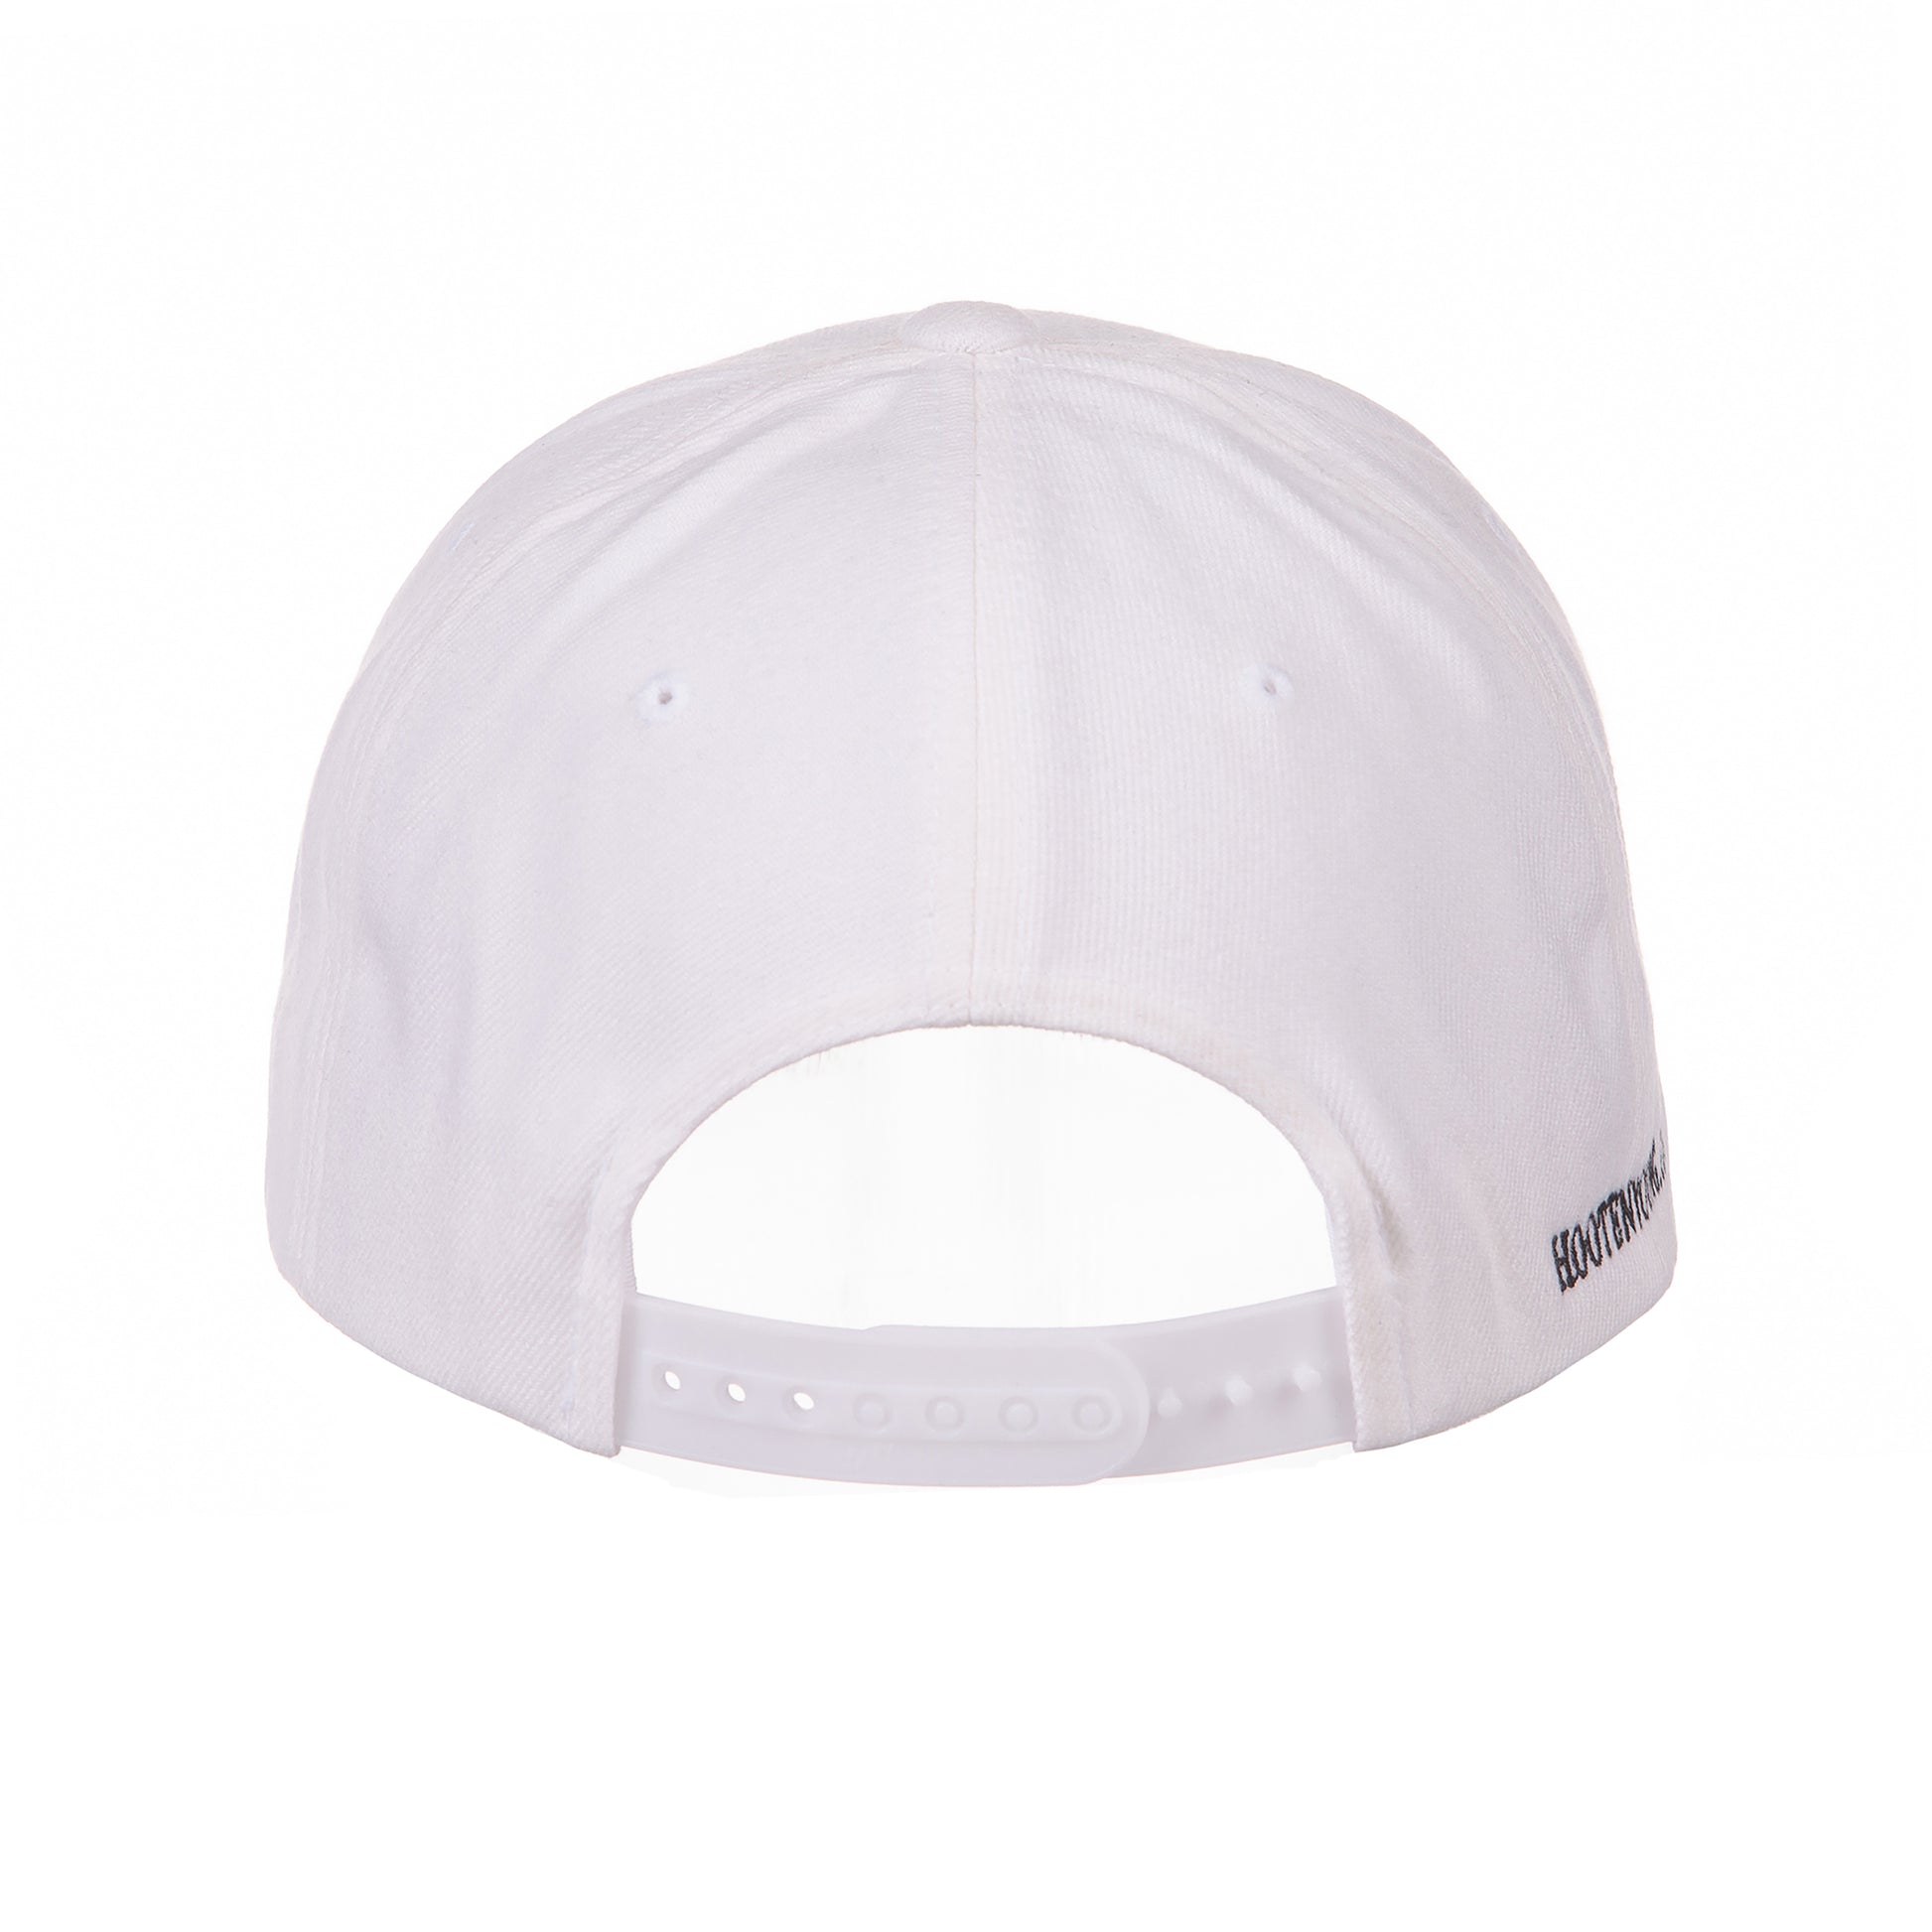 rear view of white hat